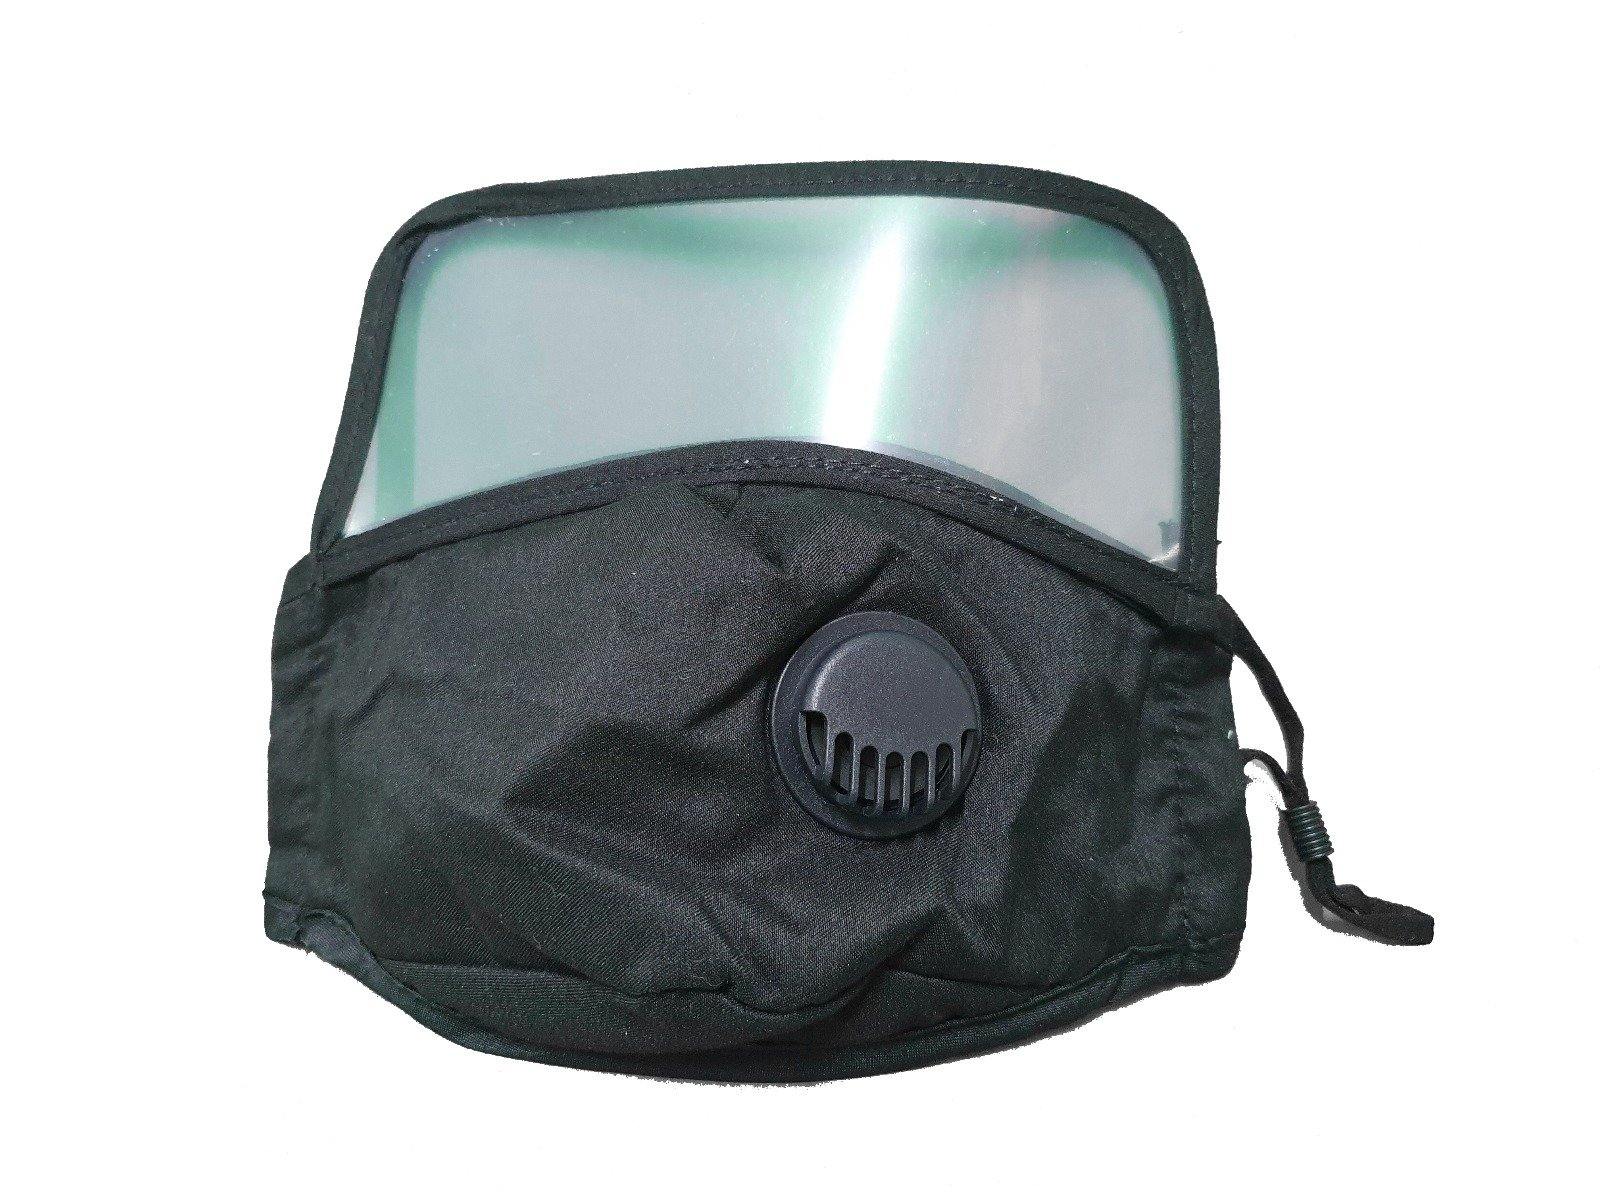 Reusable Face Mask with Shield & PM2.5 Filter